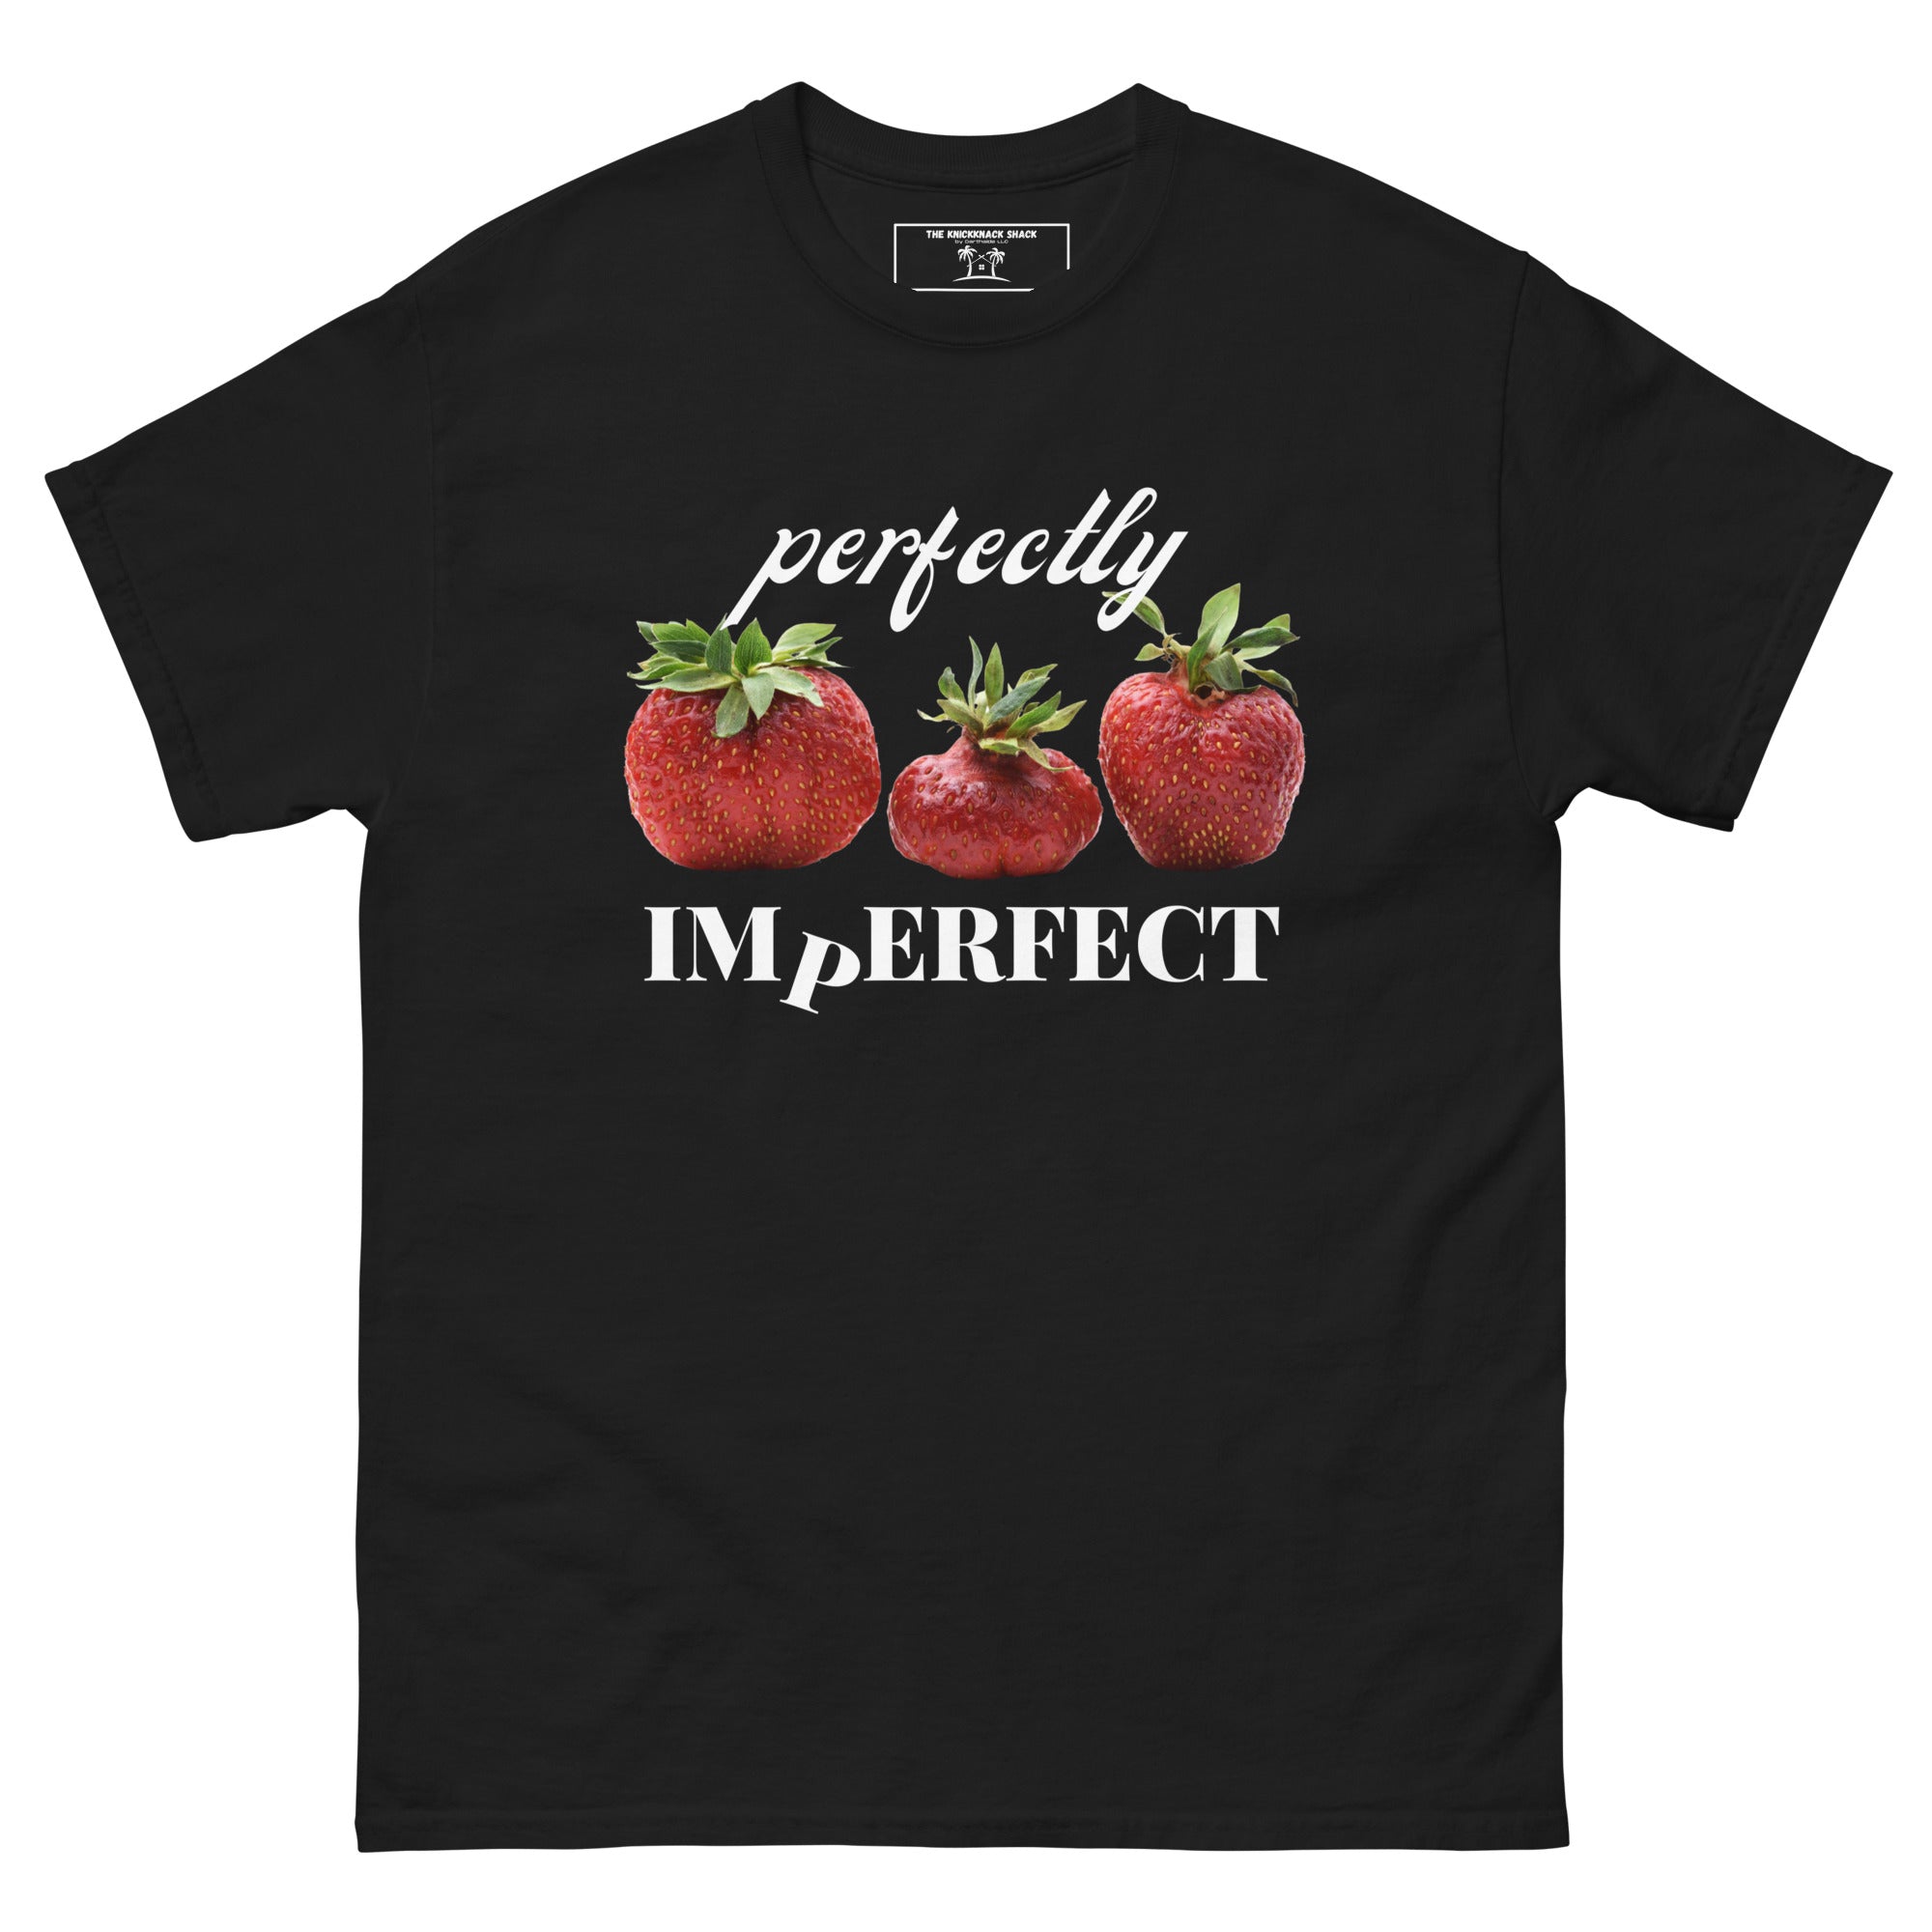 Classic Tee - Perfectly Imperfect (Style 1) (Dark Colors)